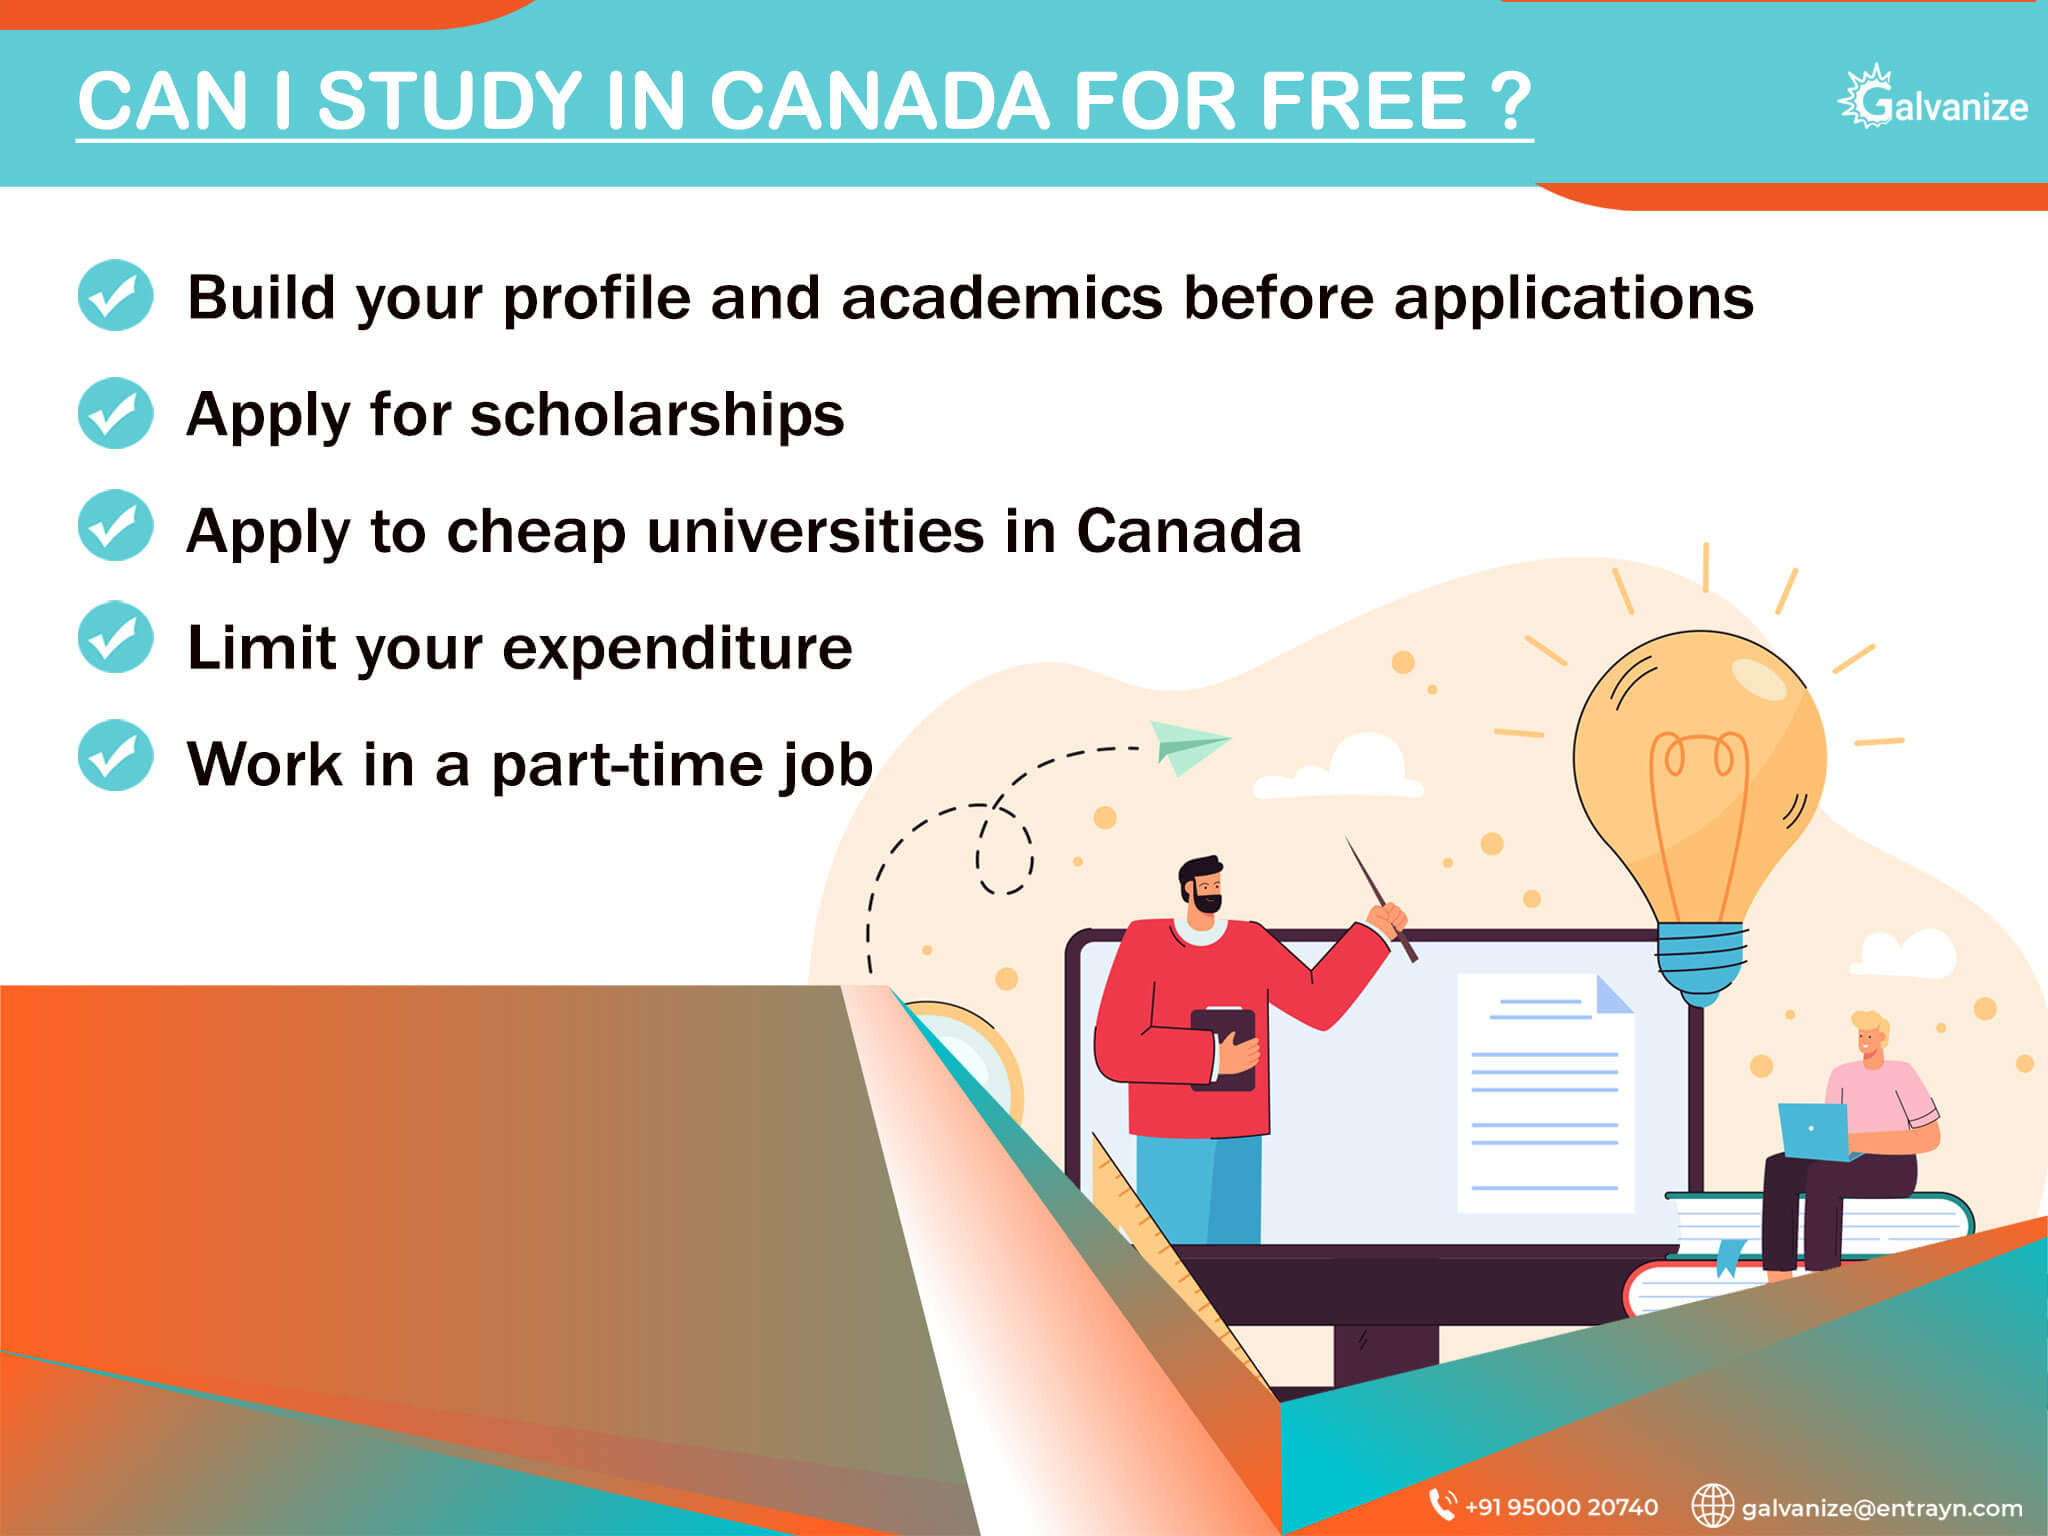 Study in Canada for Free (1)